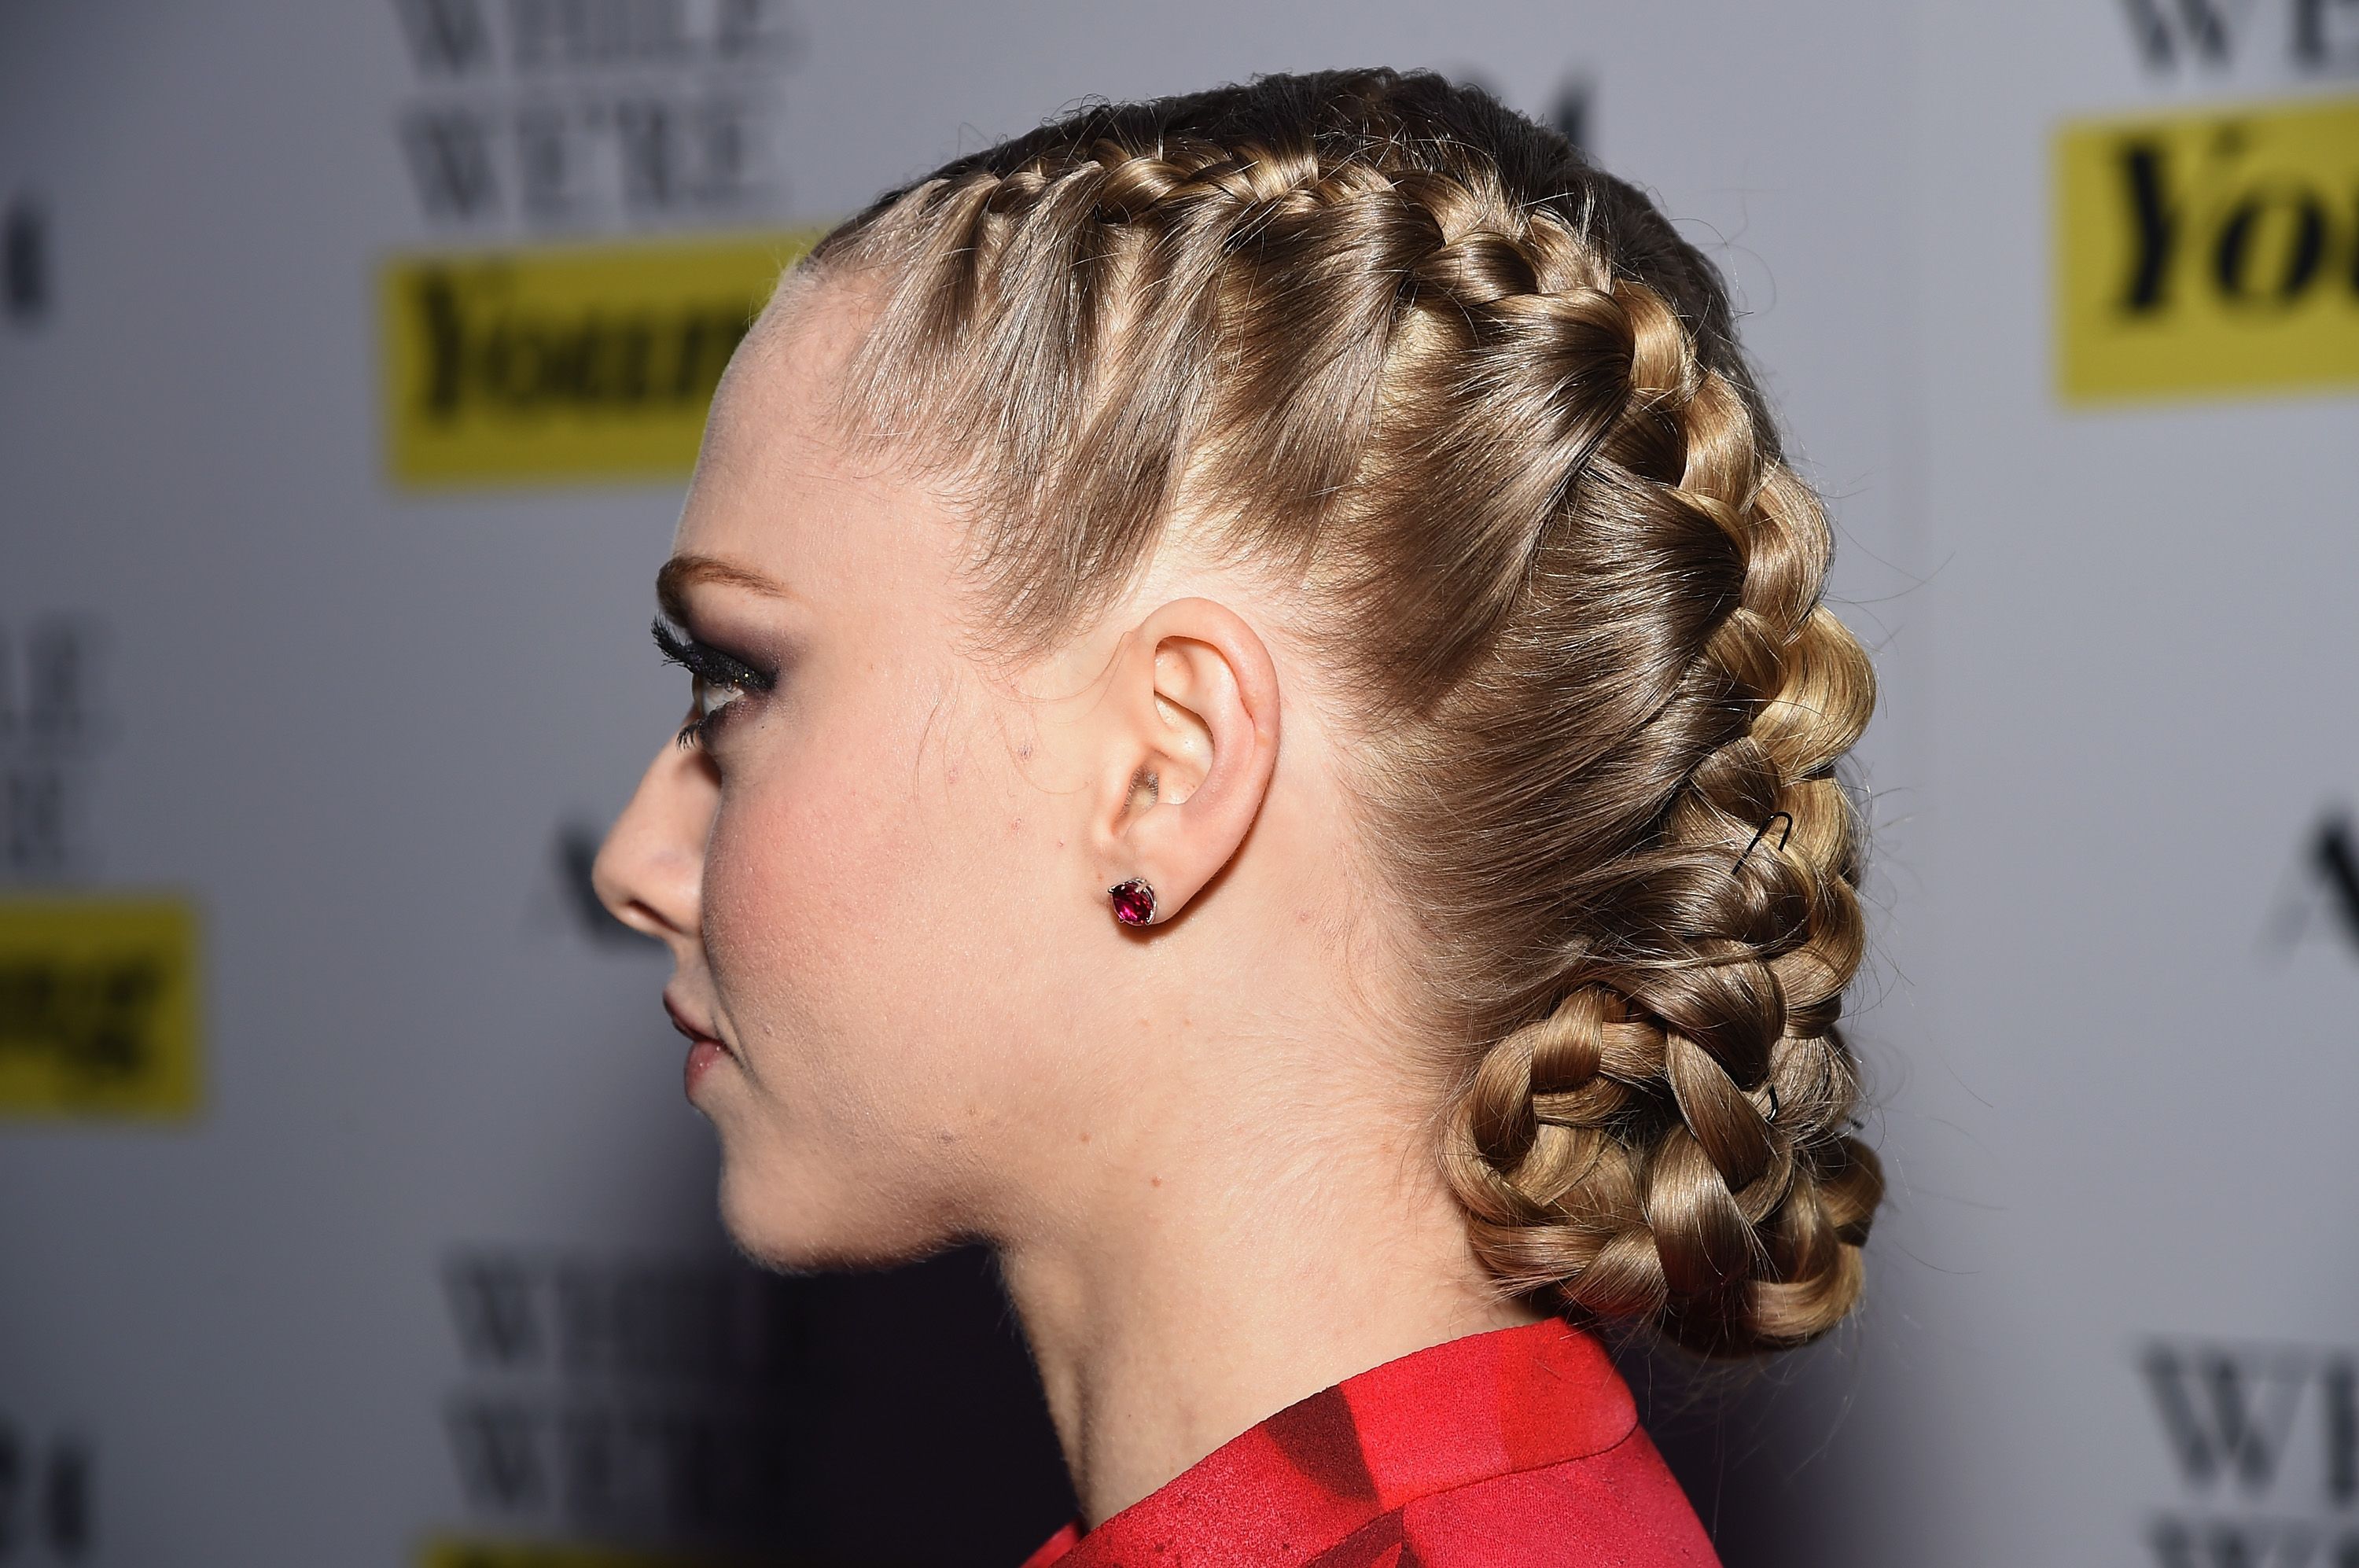 How To French Braid Your Own Hair: Top 1 Guide To Follow